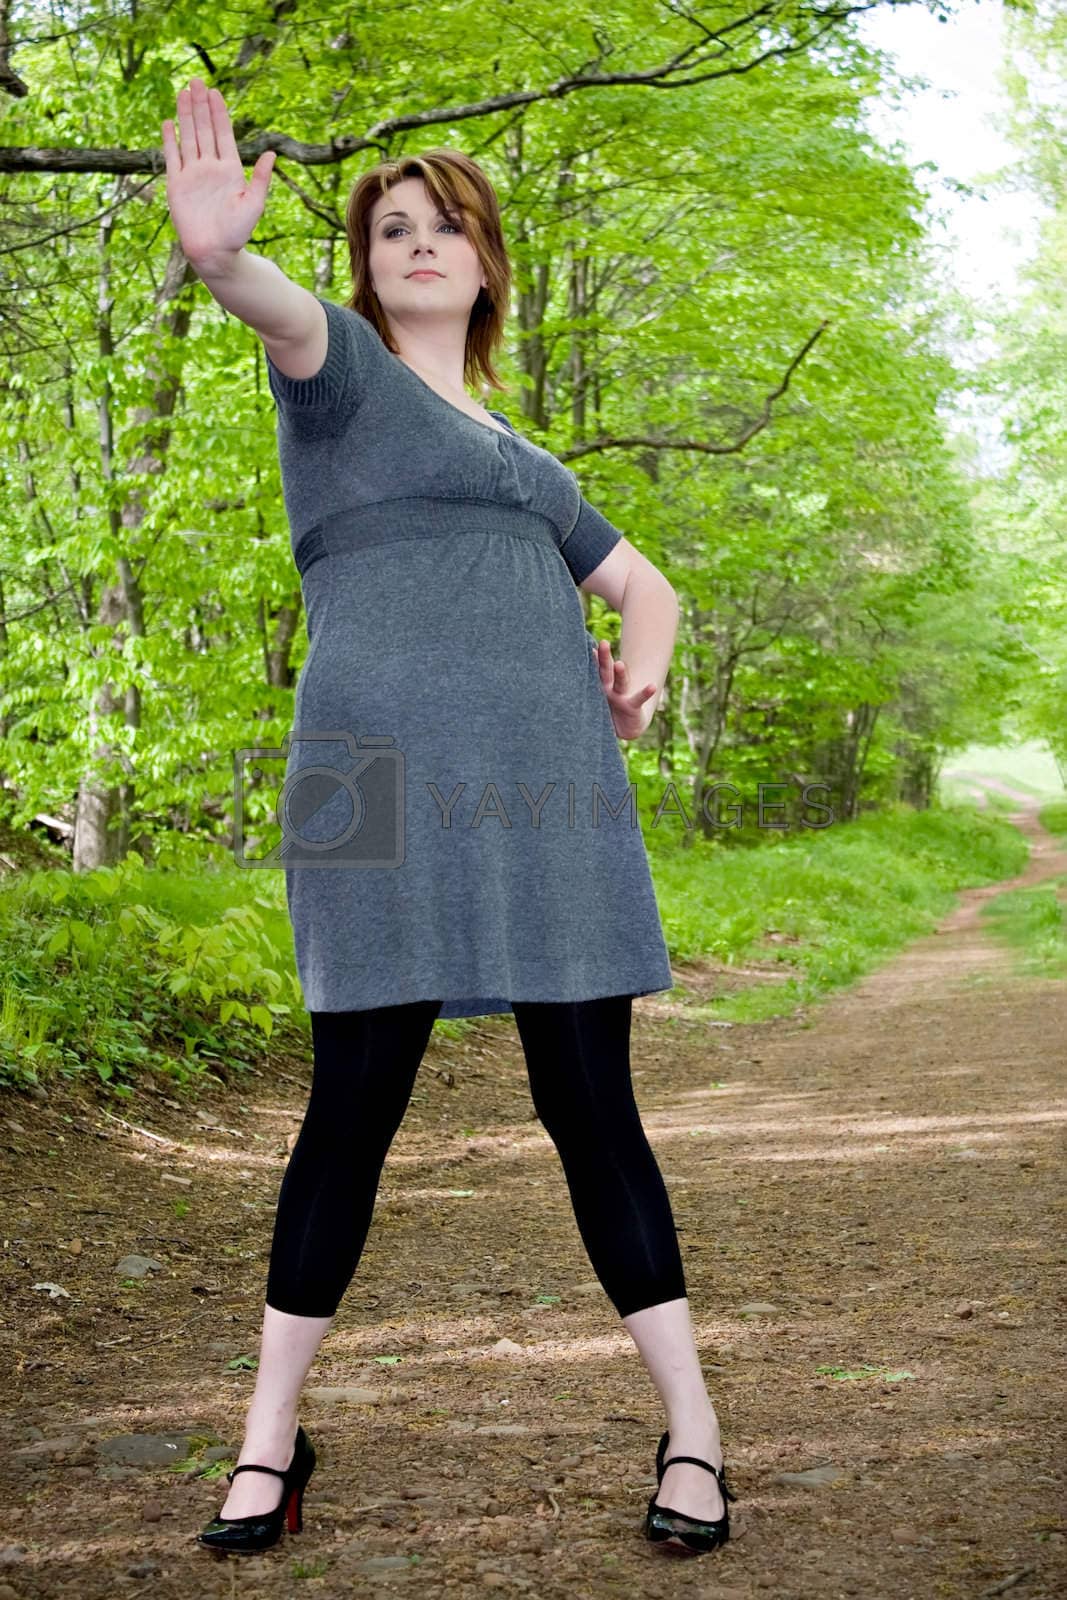 Royalty free image of Woman Saying Stop by graficallyminded